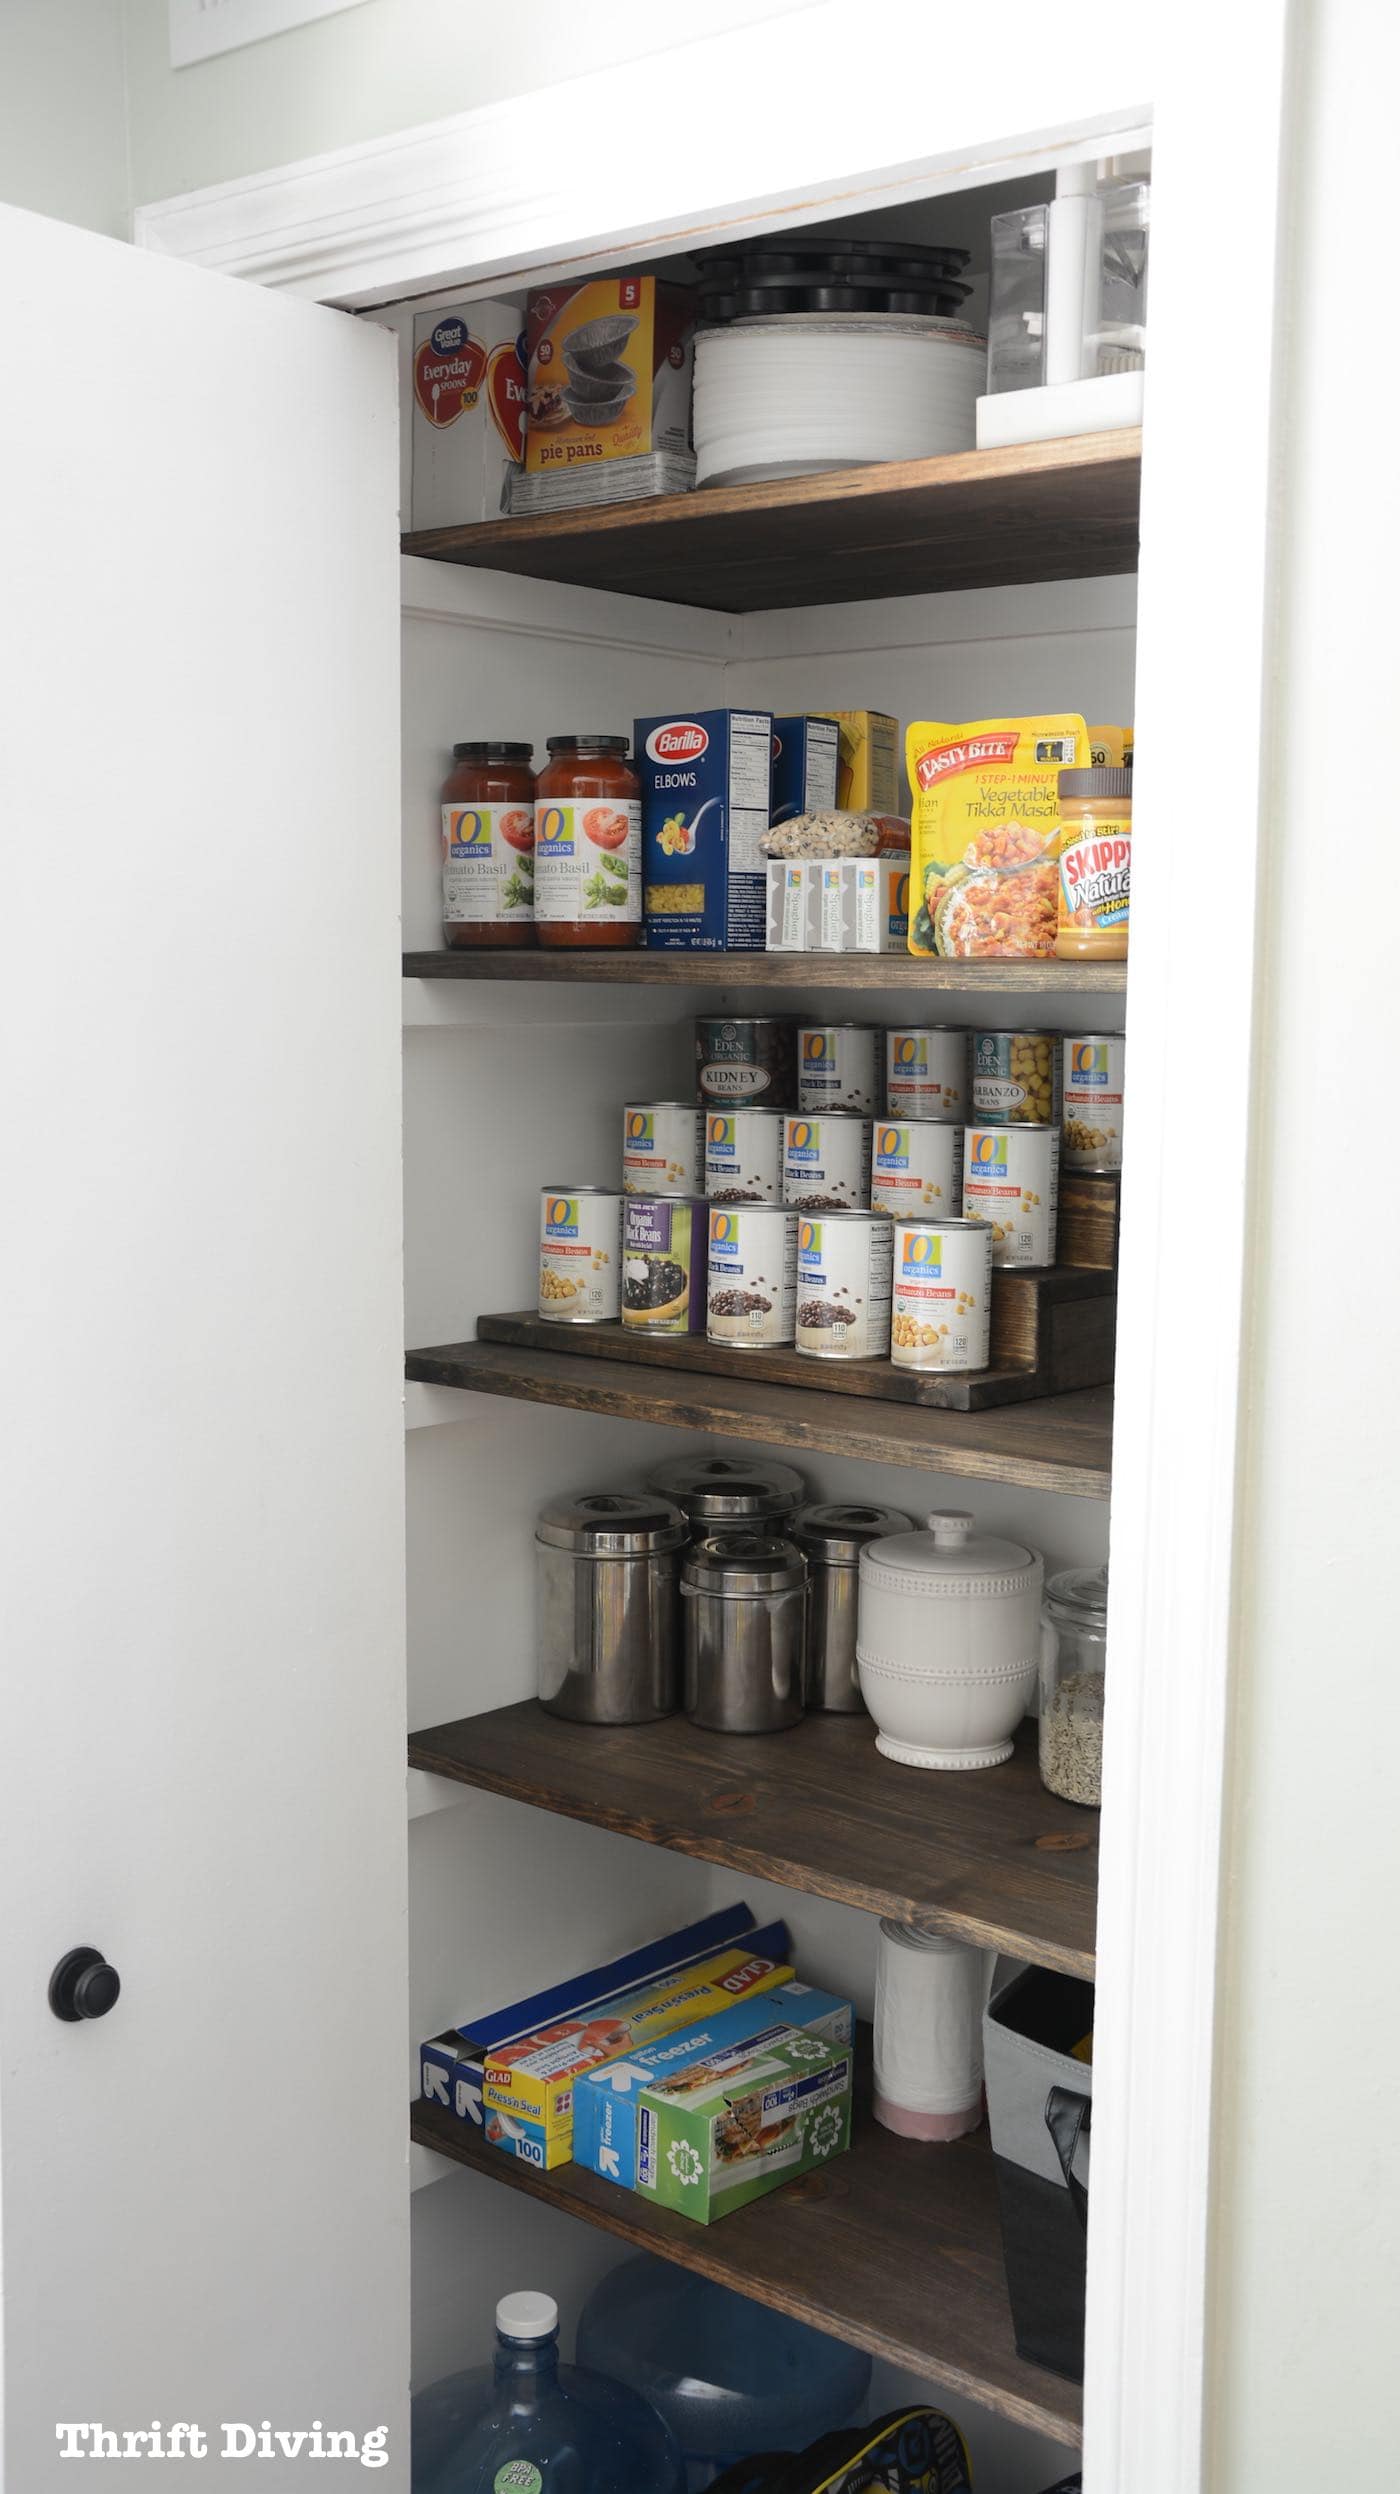 Pantry Makeover and Can Food Organizer with Hidden Storage Underneath - Hide treats and snacks from your kids! - Thrift Diving Blog